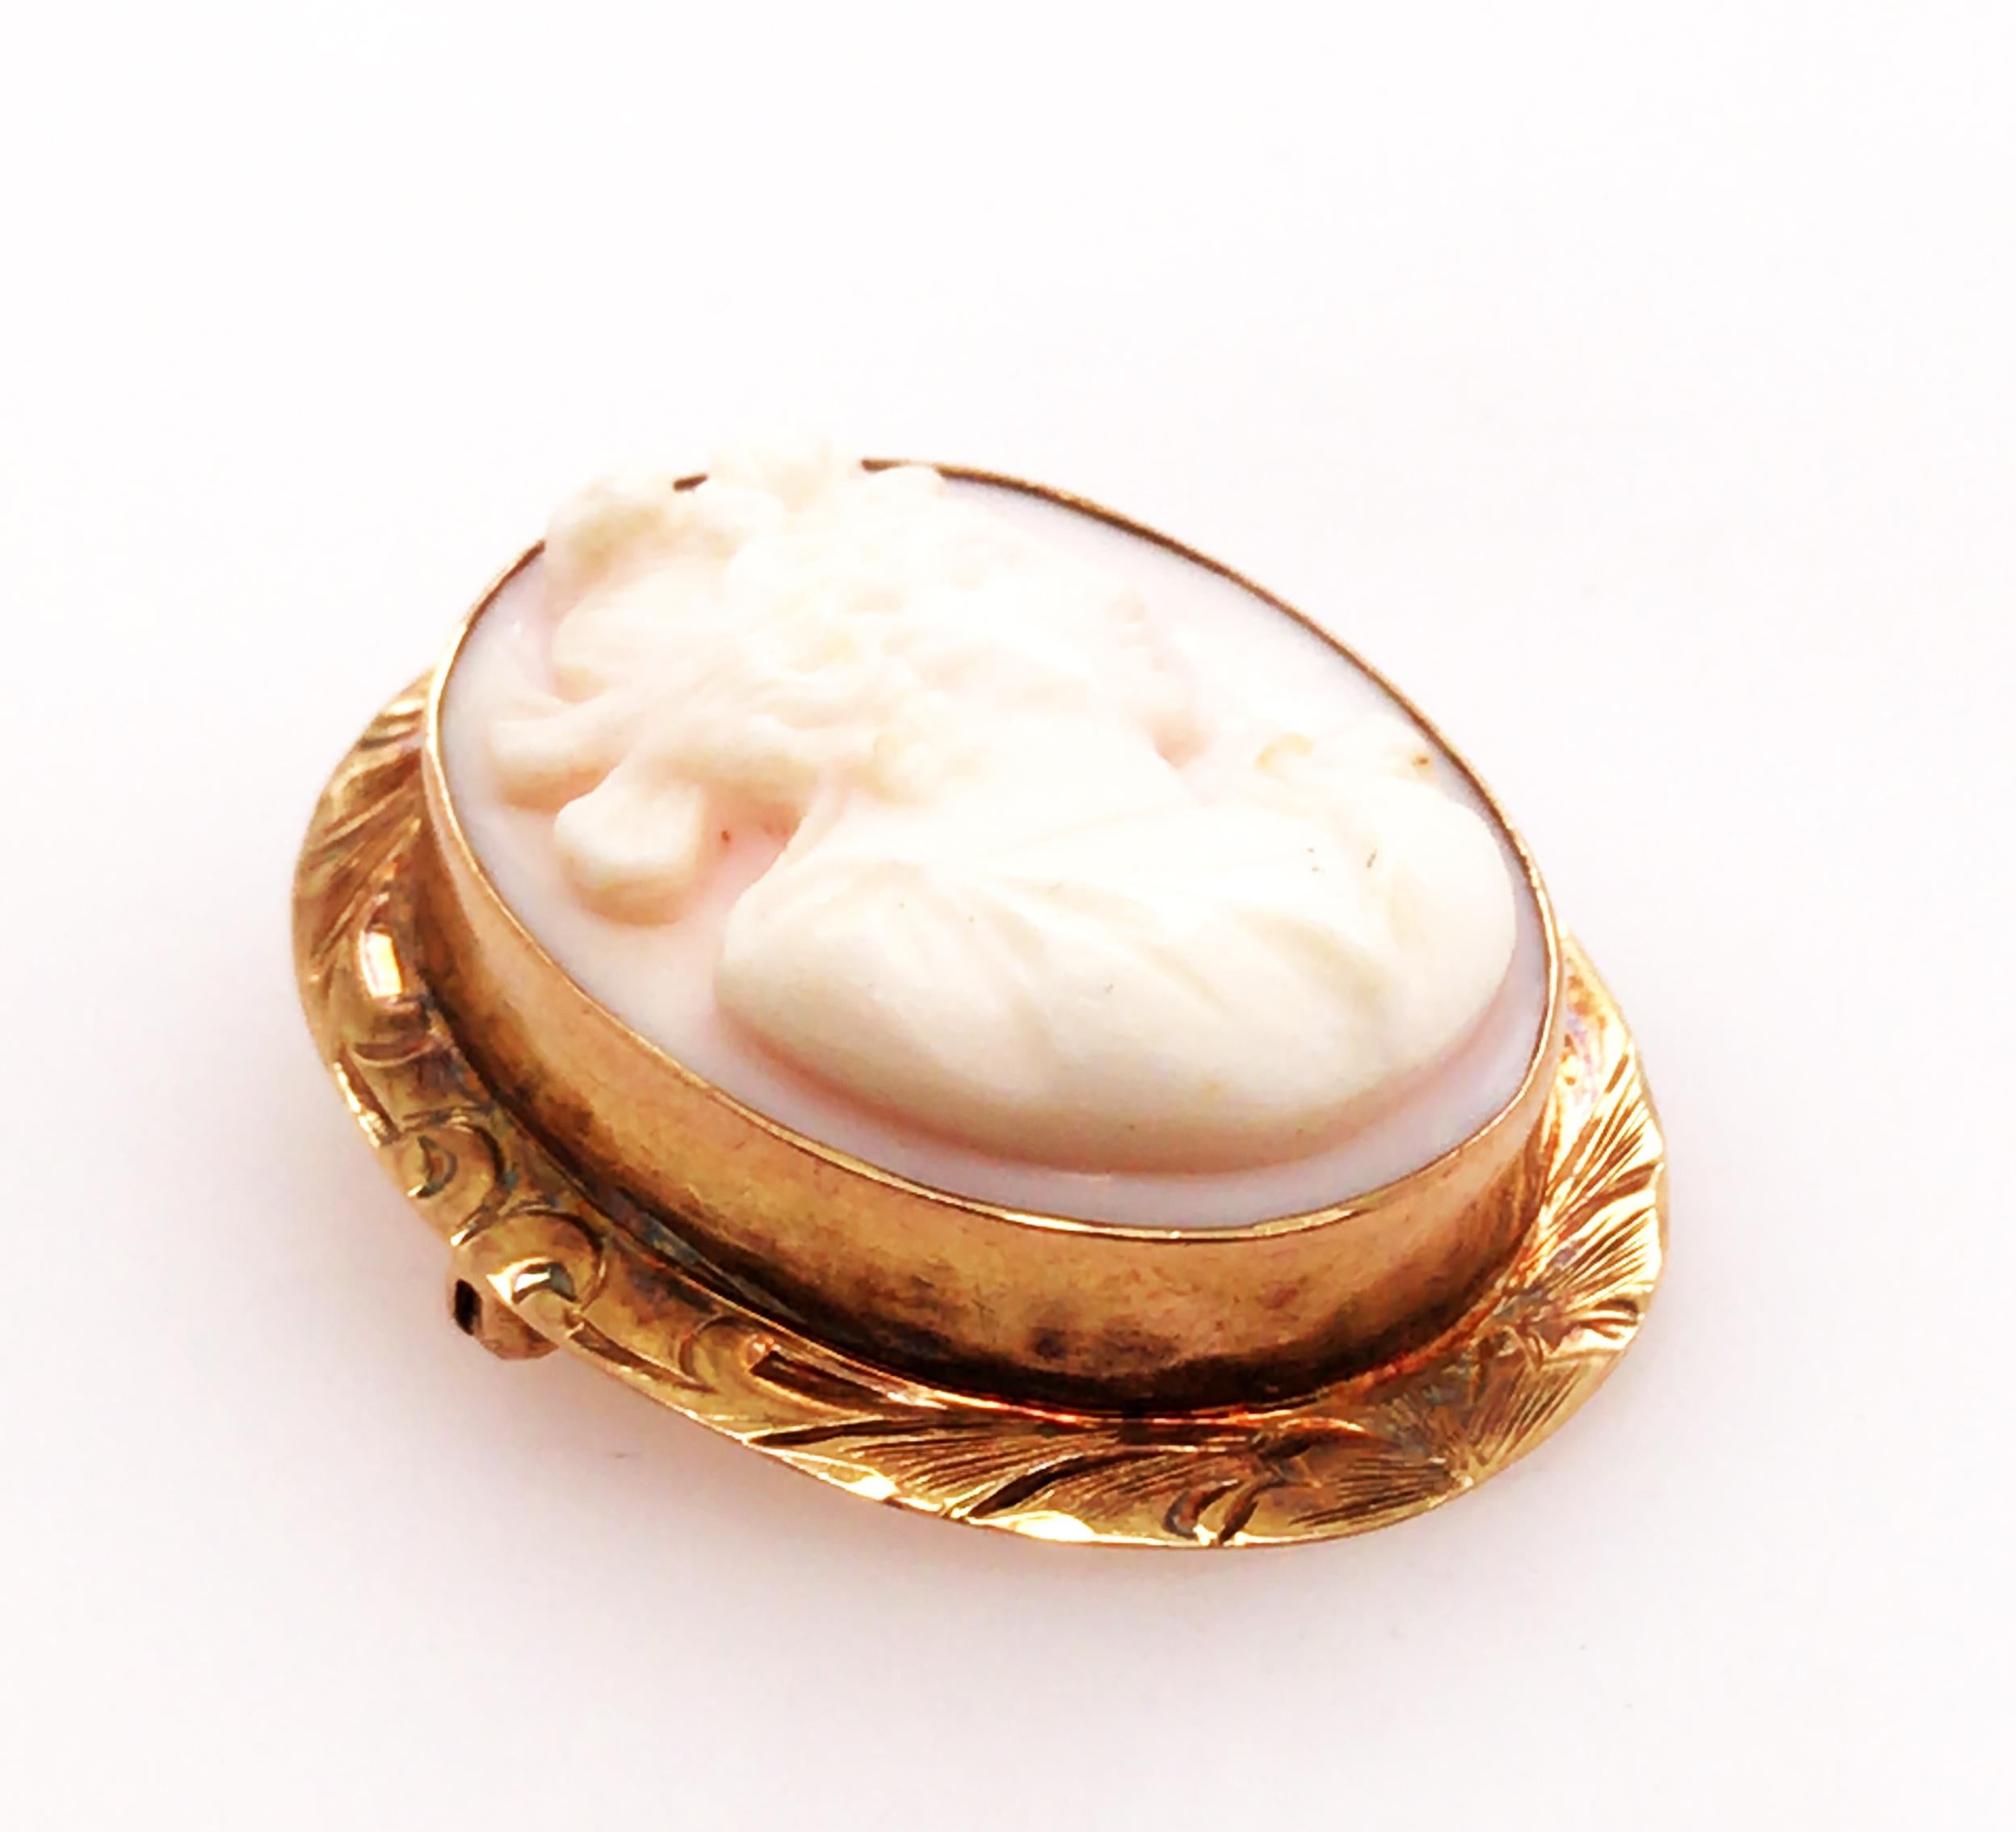 Vintage Cameo Brooch Pendant Art Deco Pin 14K Yellow Gold



Featuring an Exquisitely Hand Carved  30 x 22m Antique Cameo 

Absolutely Spectacular Hand Carved Details

Has a Bail So It Can Be Worn as a Pendant

Solid 14K Yellow Gold

Circa